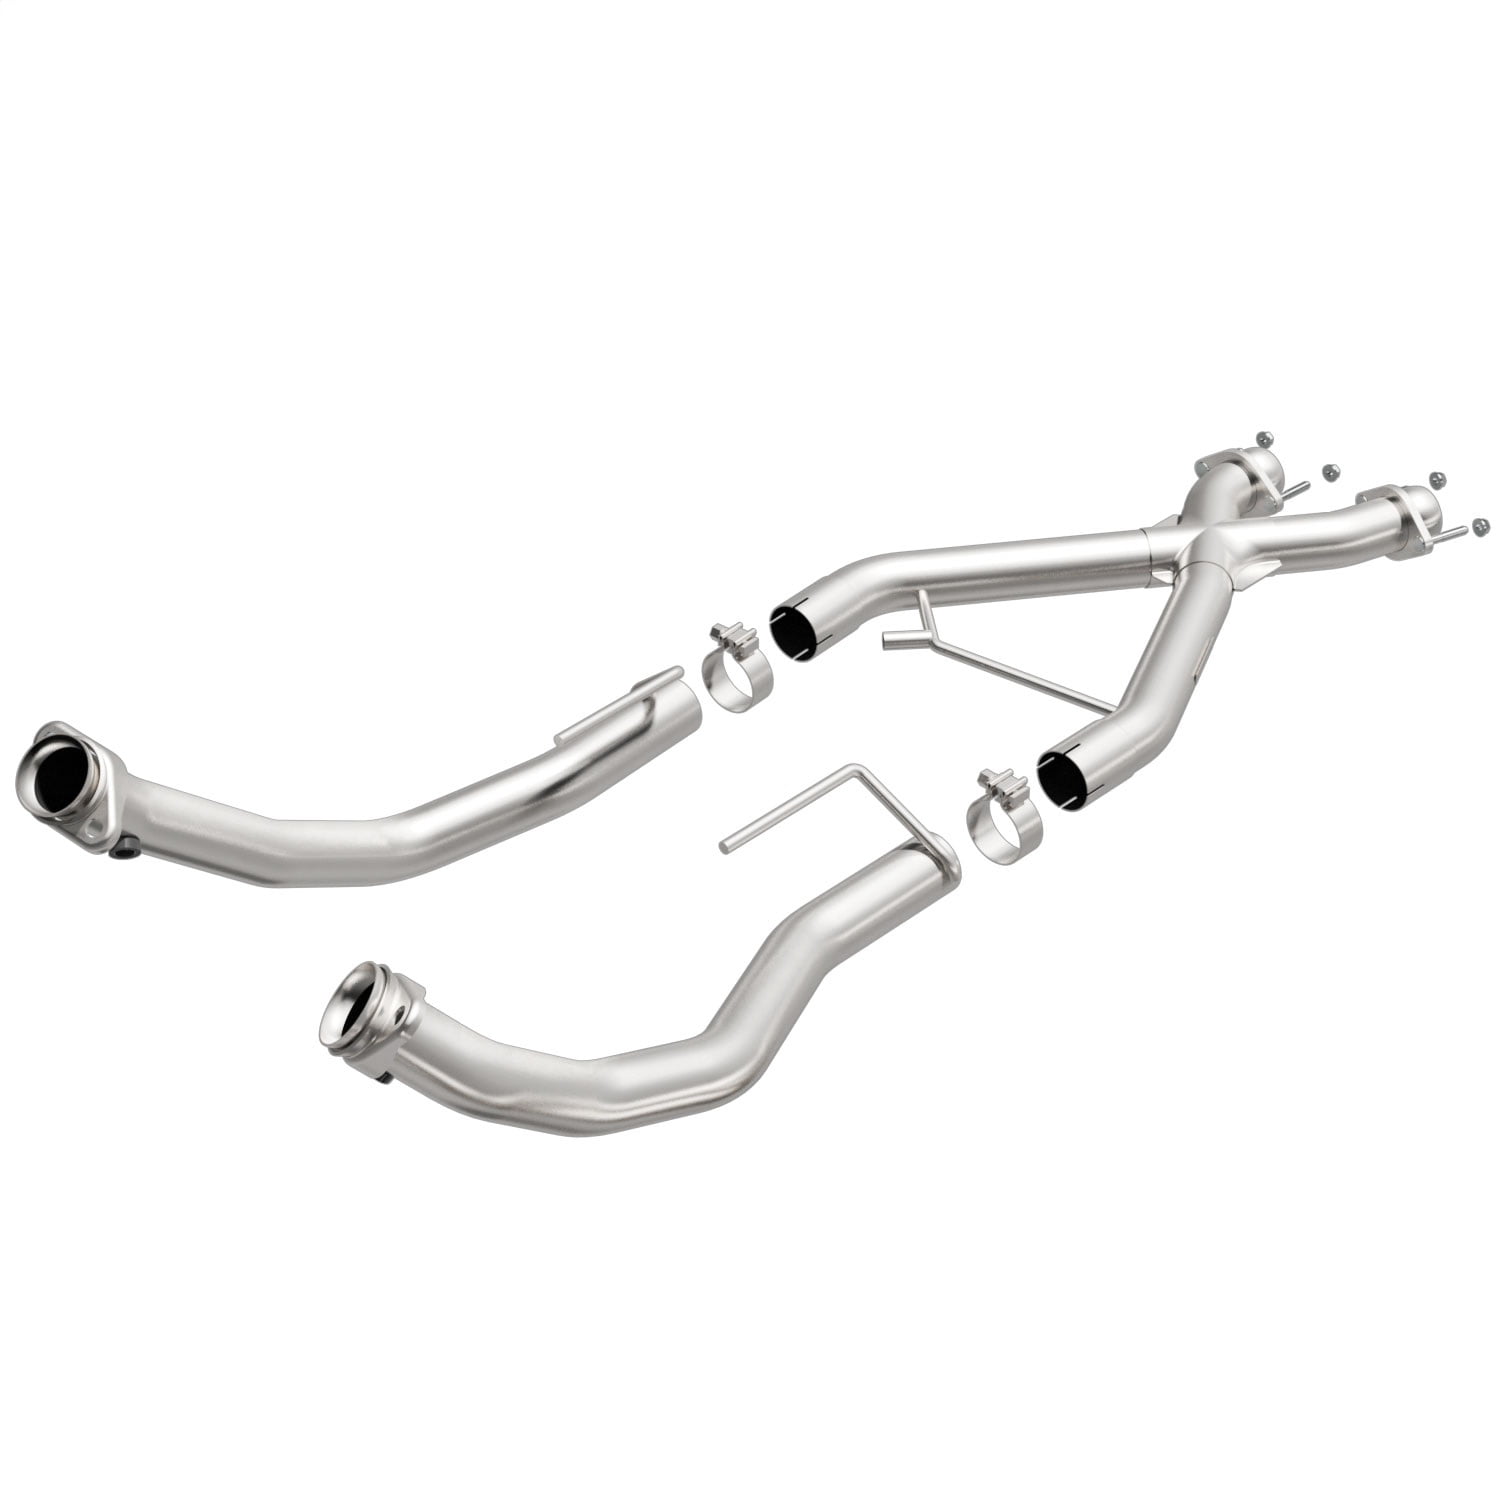 Muffler X Pipe 2.25" ID X-pipe Tube Performance Cross Over H Stainless Exhaust 